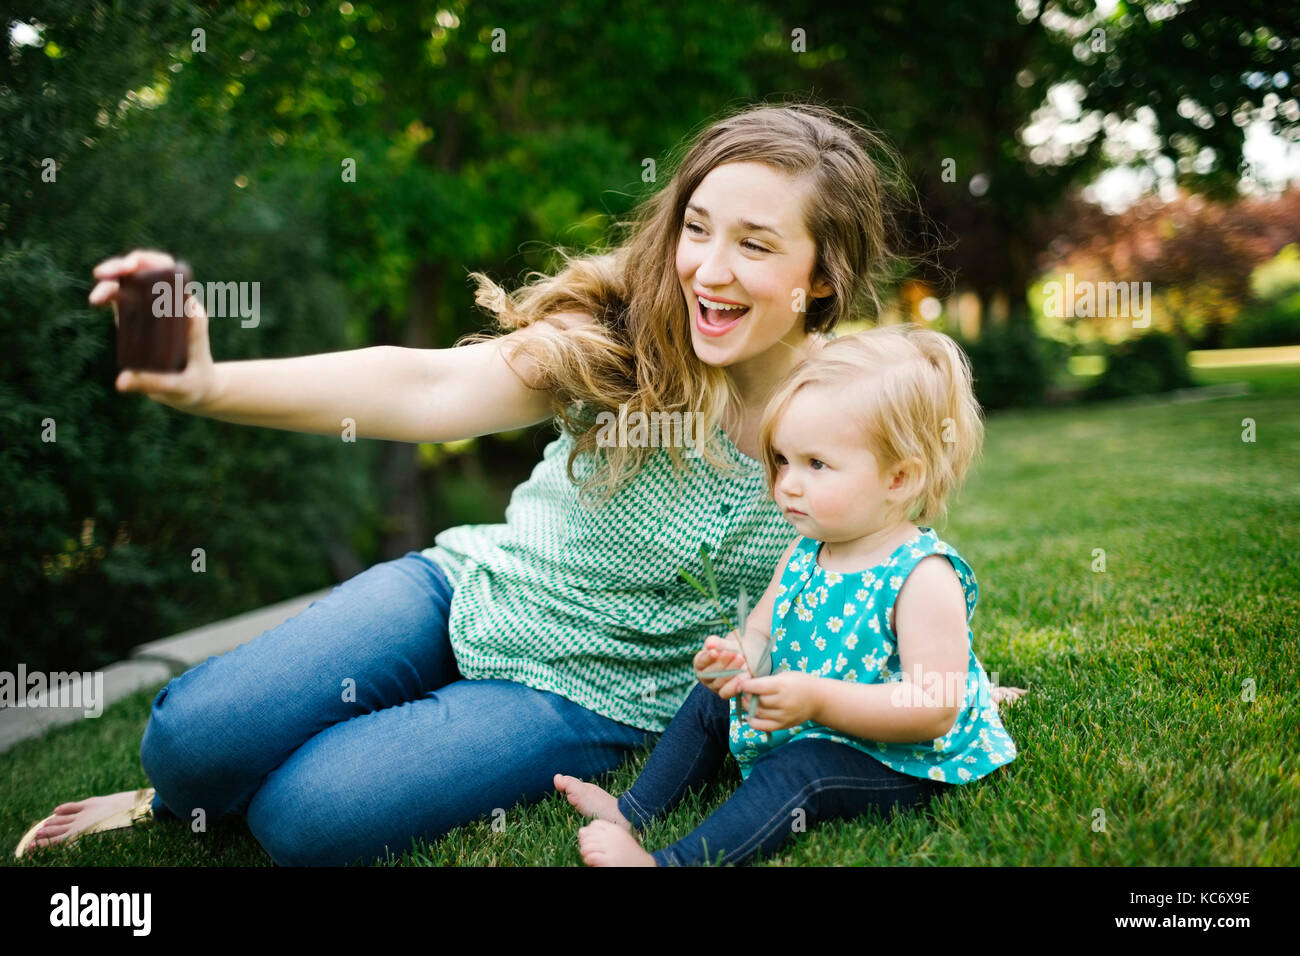 Mother taking selfie with daughter (12-17 months) Stock Photo